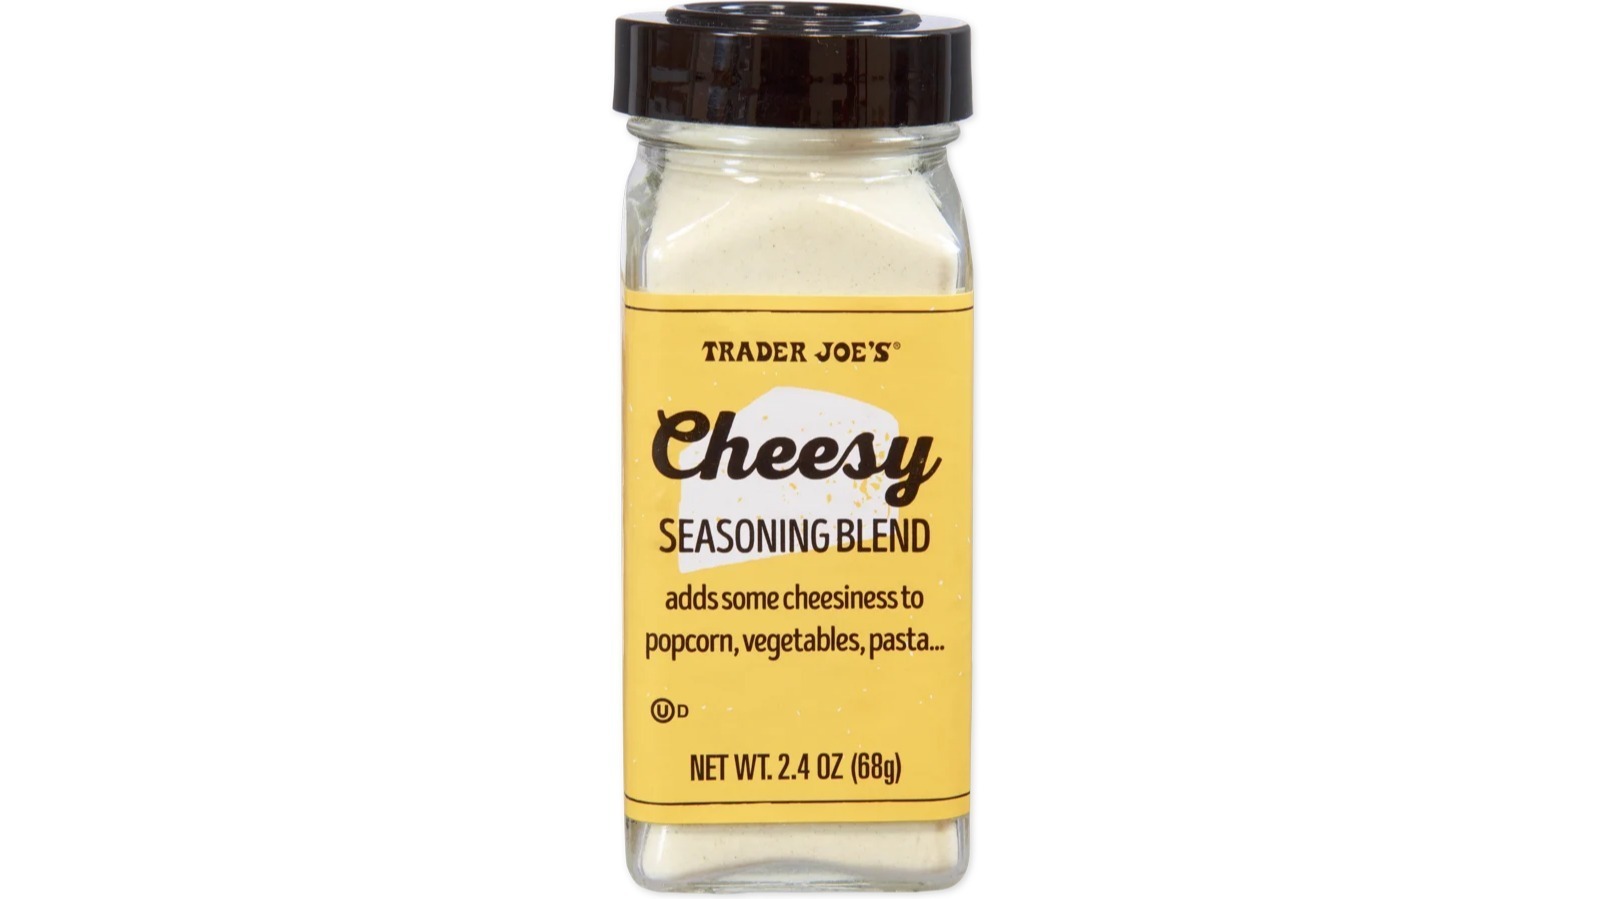 https://www.mashed.com/img/gallery/the-big-problem-trader-joes-fans-have-with-its-cheesy-seasoning-blend/l-intro-1635552426.jpg